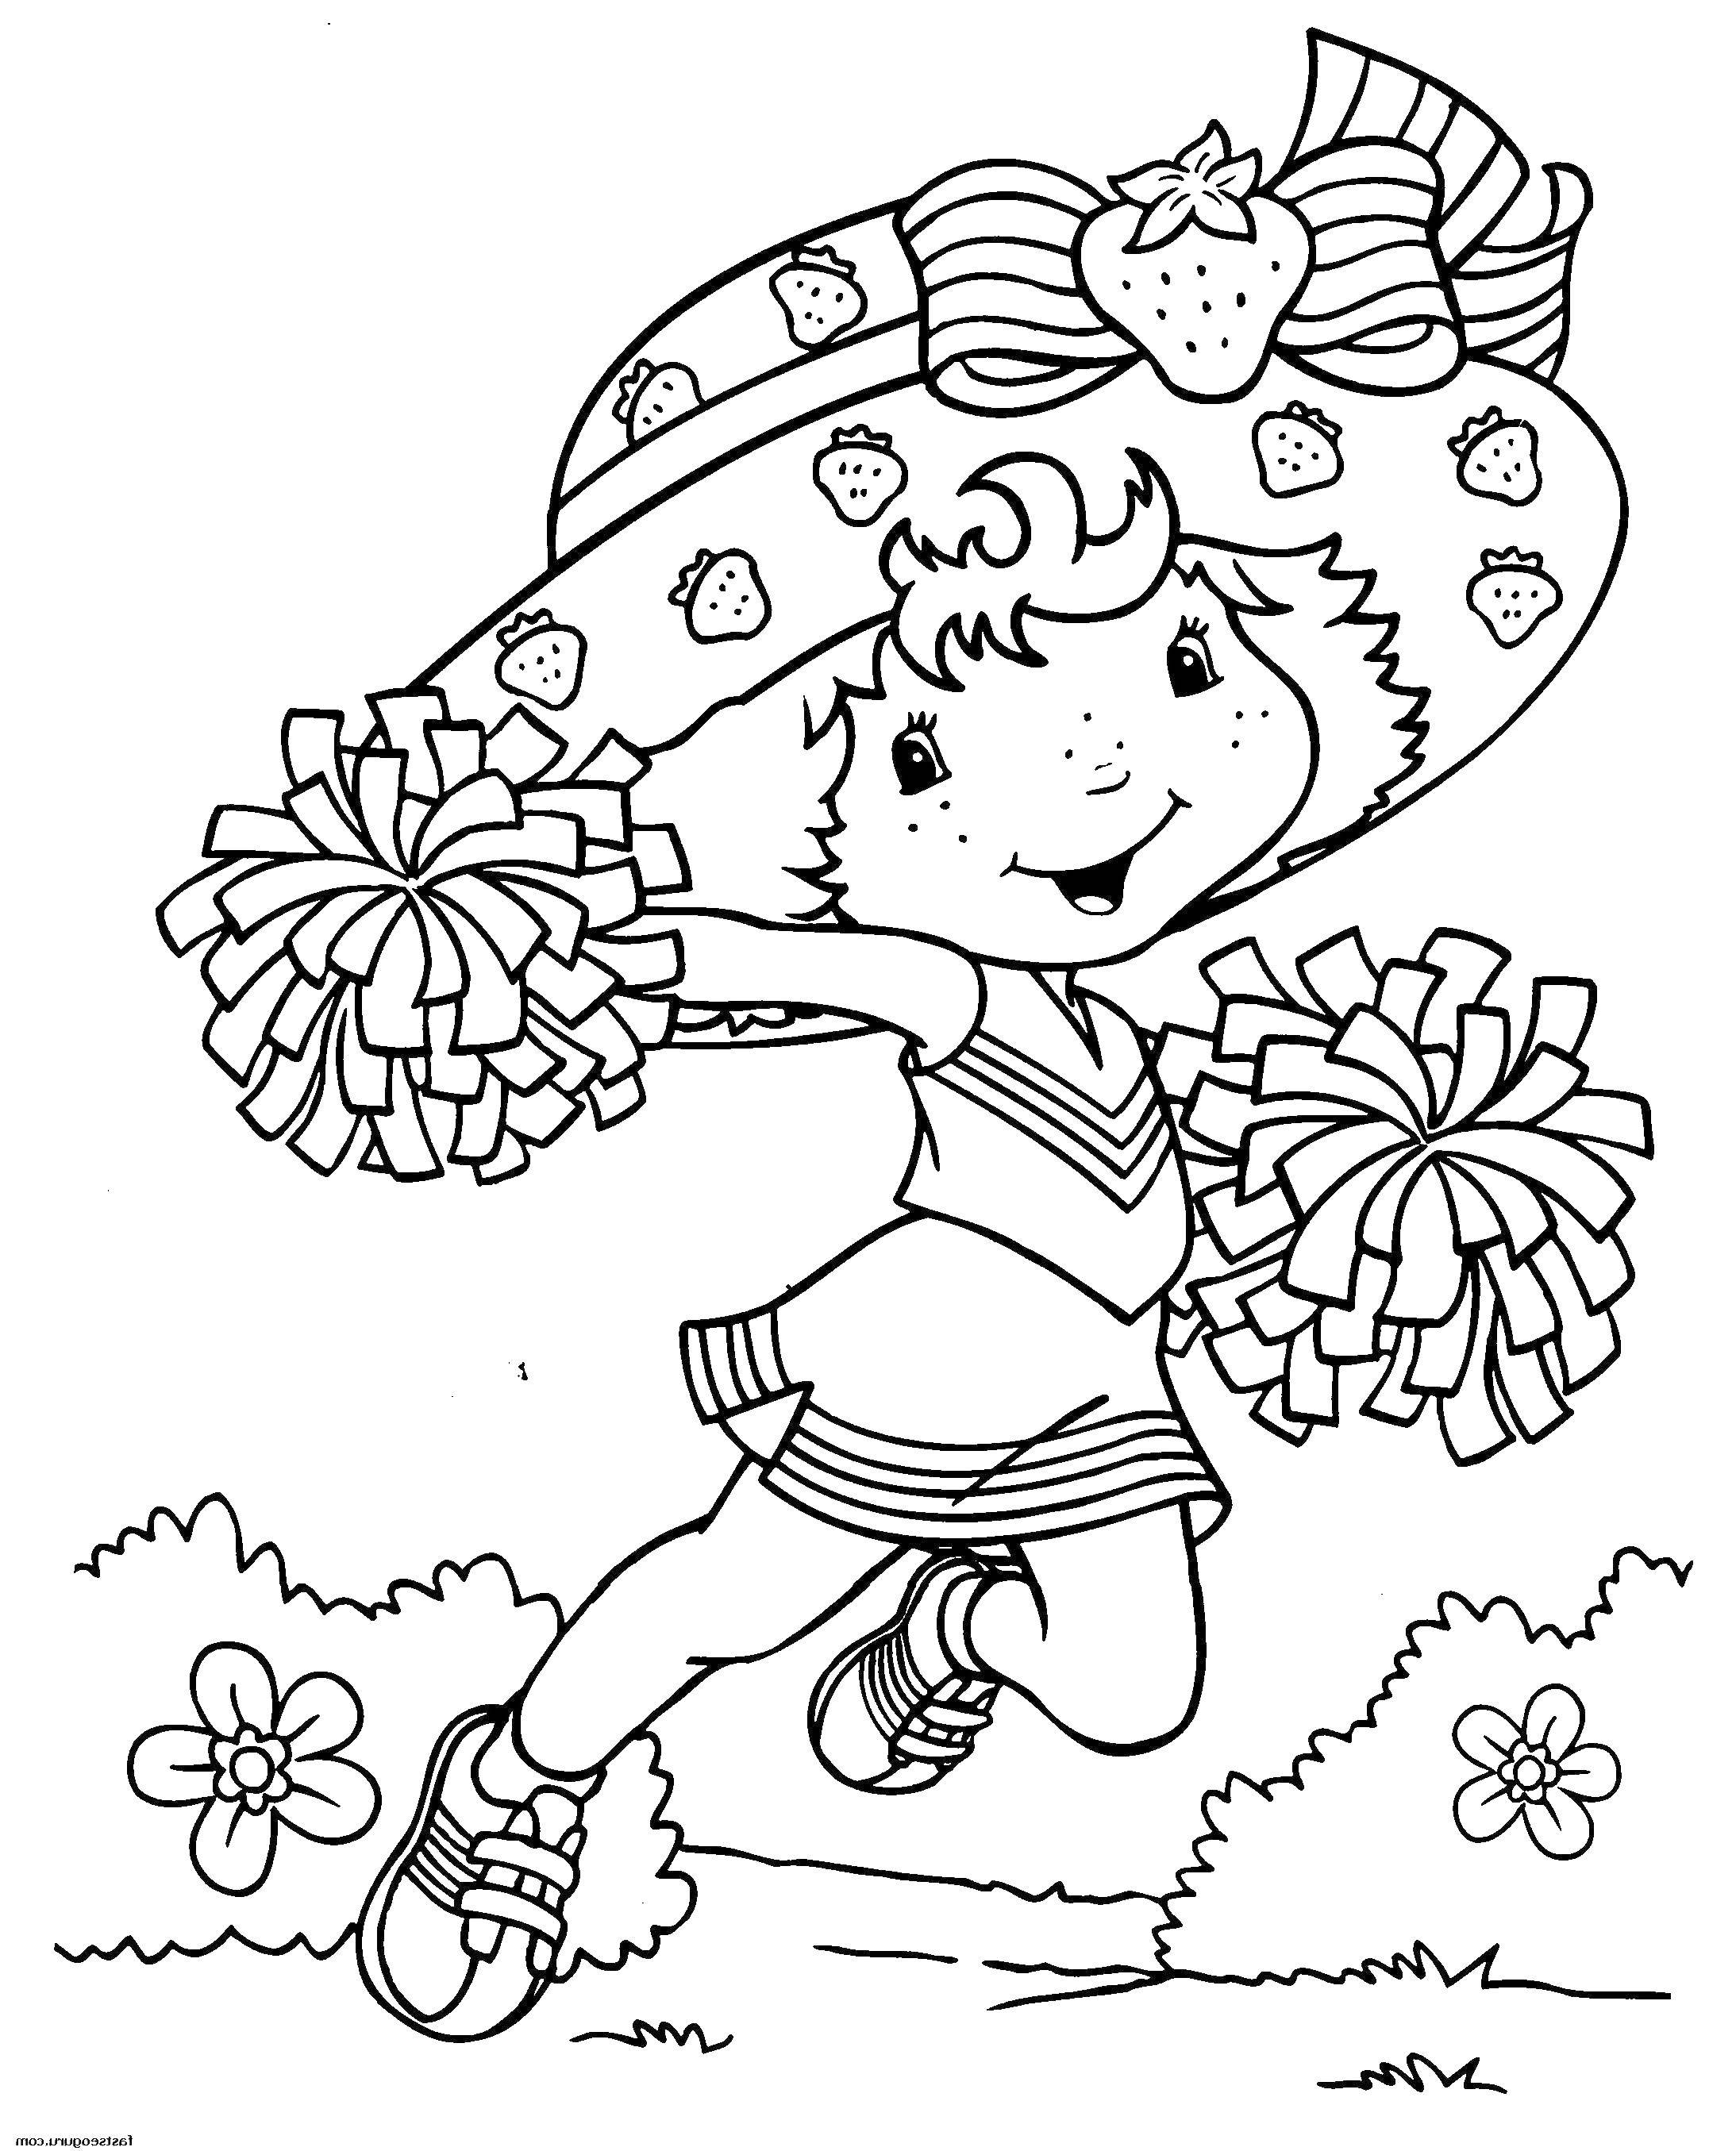 Coloring strawberry cheerleader. Category People. Tags:  strawberry.